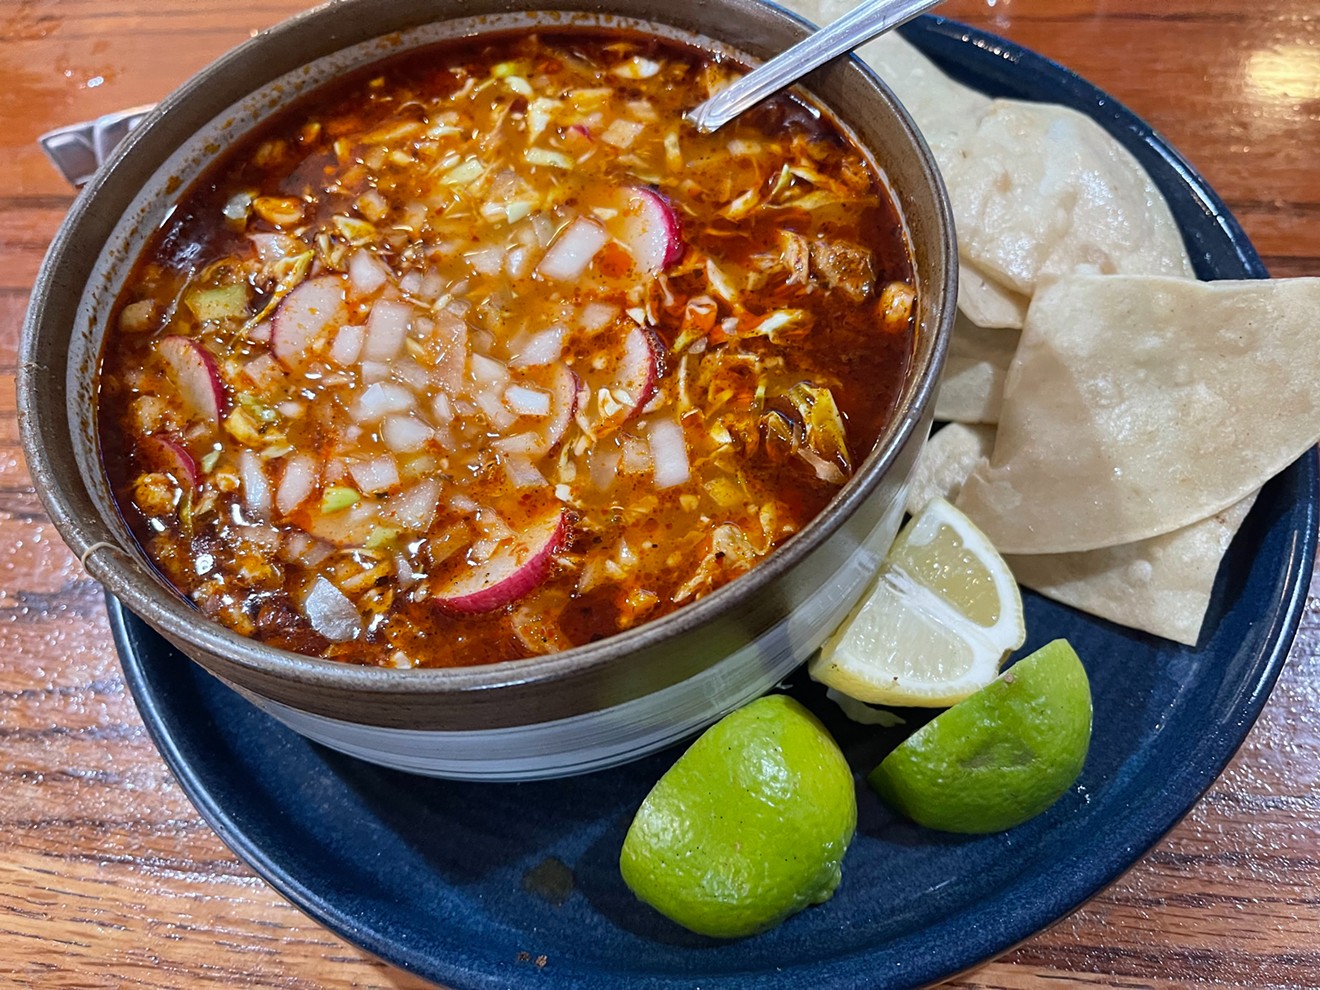 The pozole at Alebrijes Cafe & Grill is loaded with spoon-tender pork, hominy kernels and fresh veggies. The Litchfield Park spot serves some of the best Mexican food in metro Phoenix.